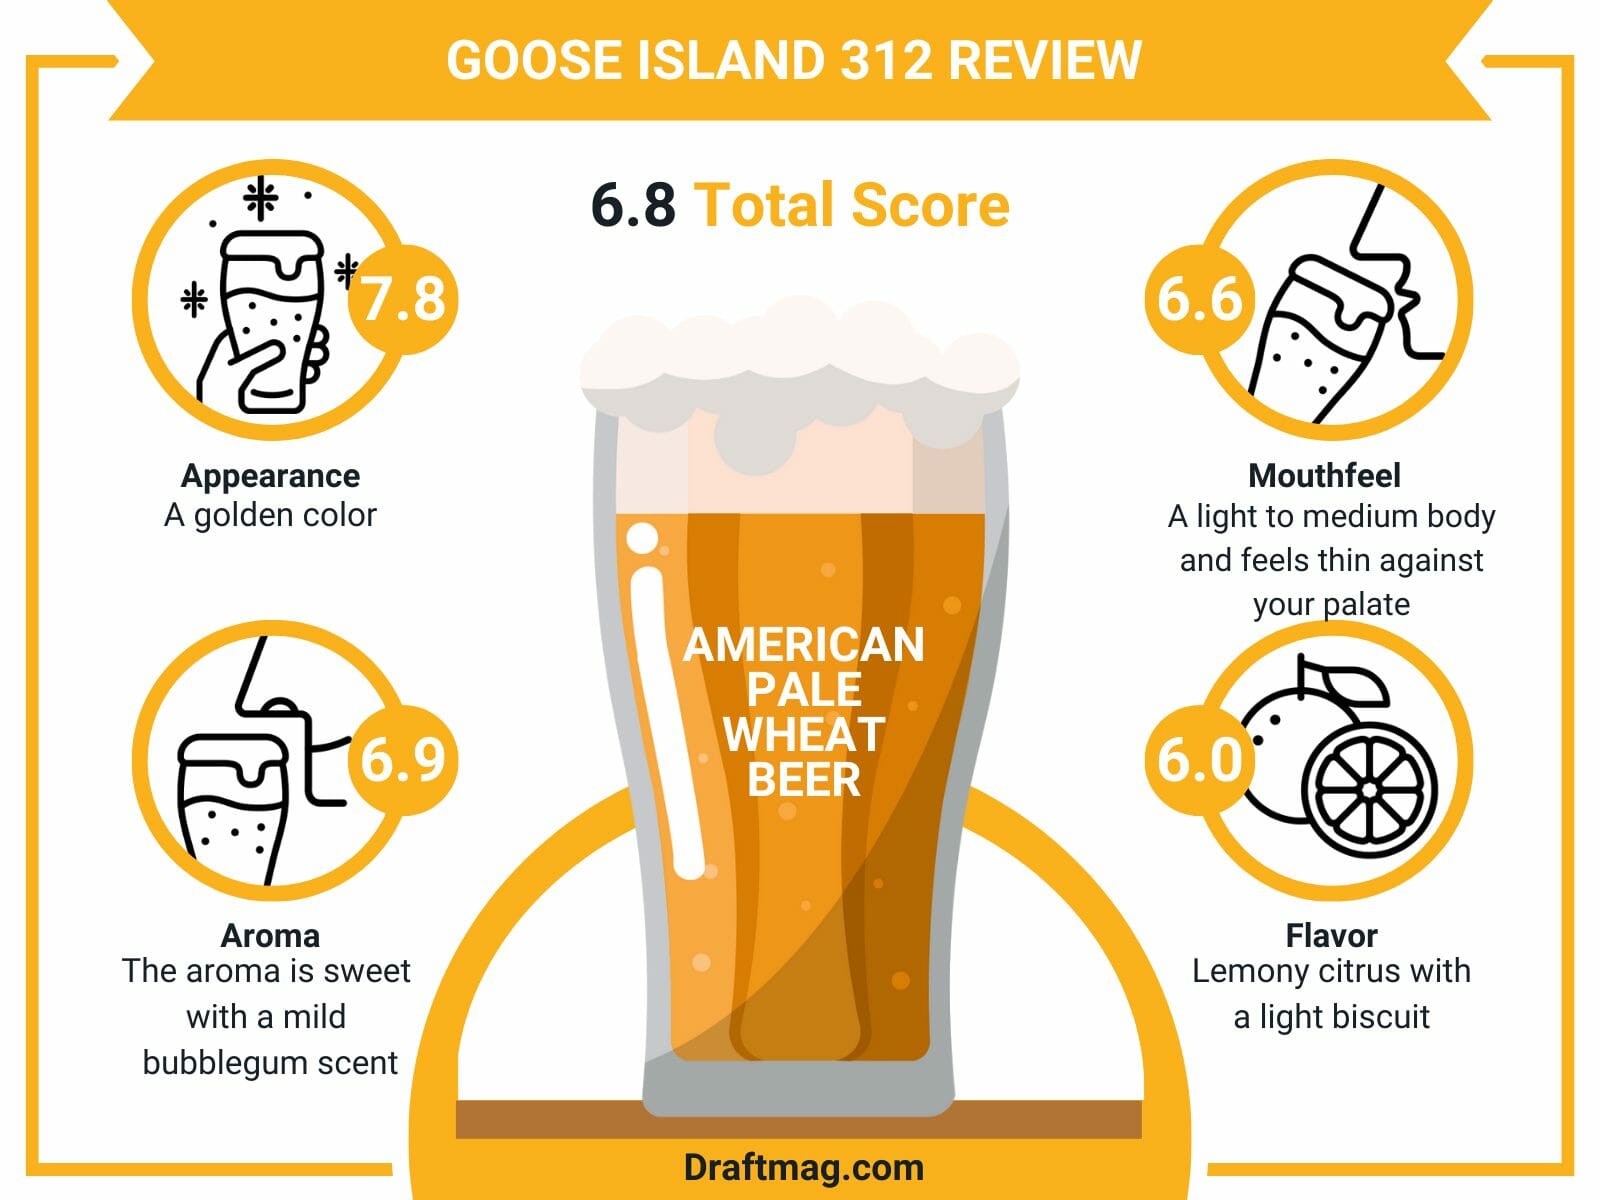 Goose island review infographic